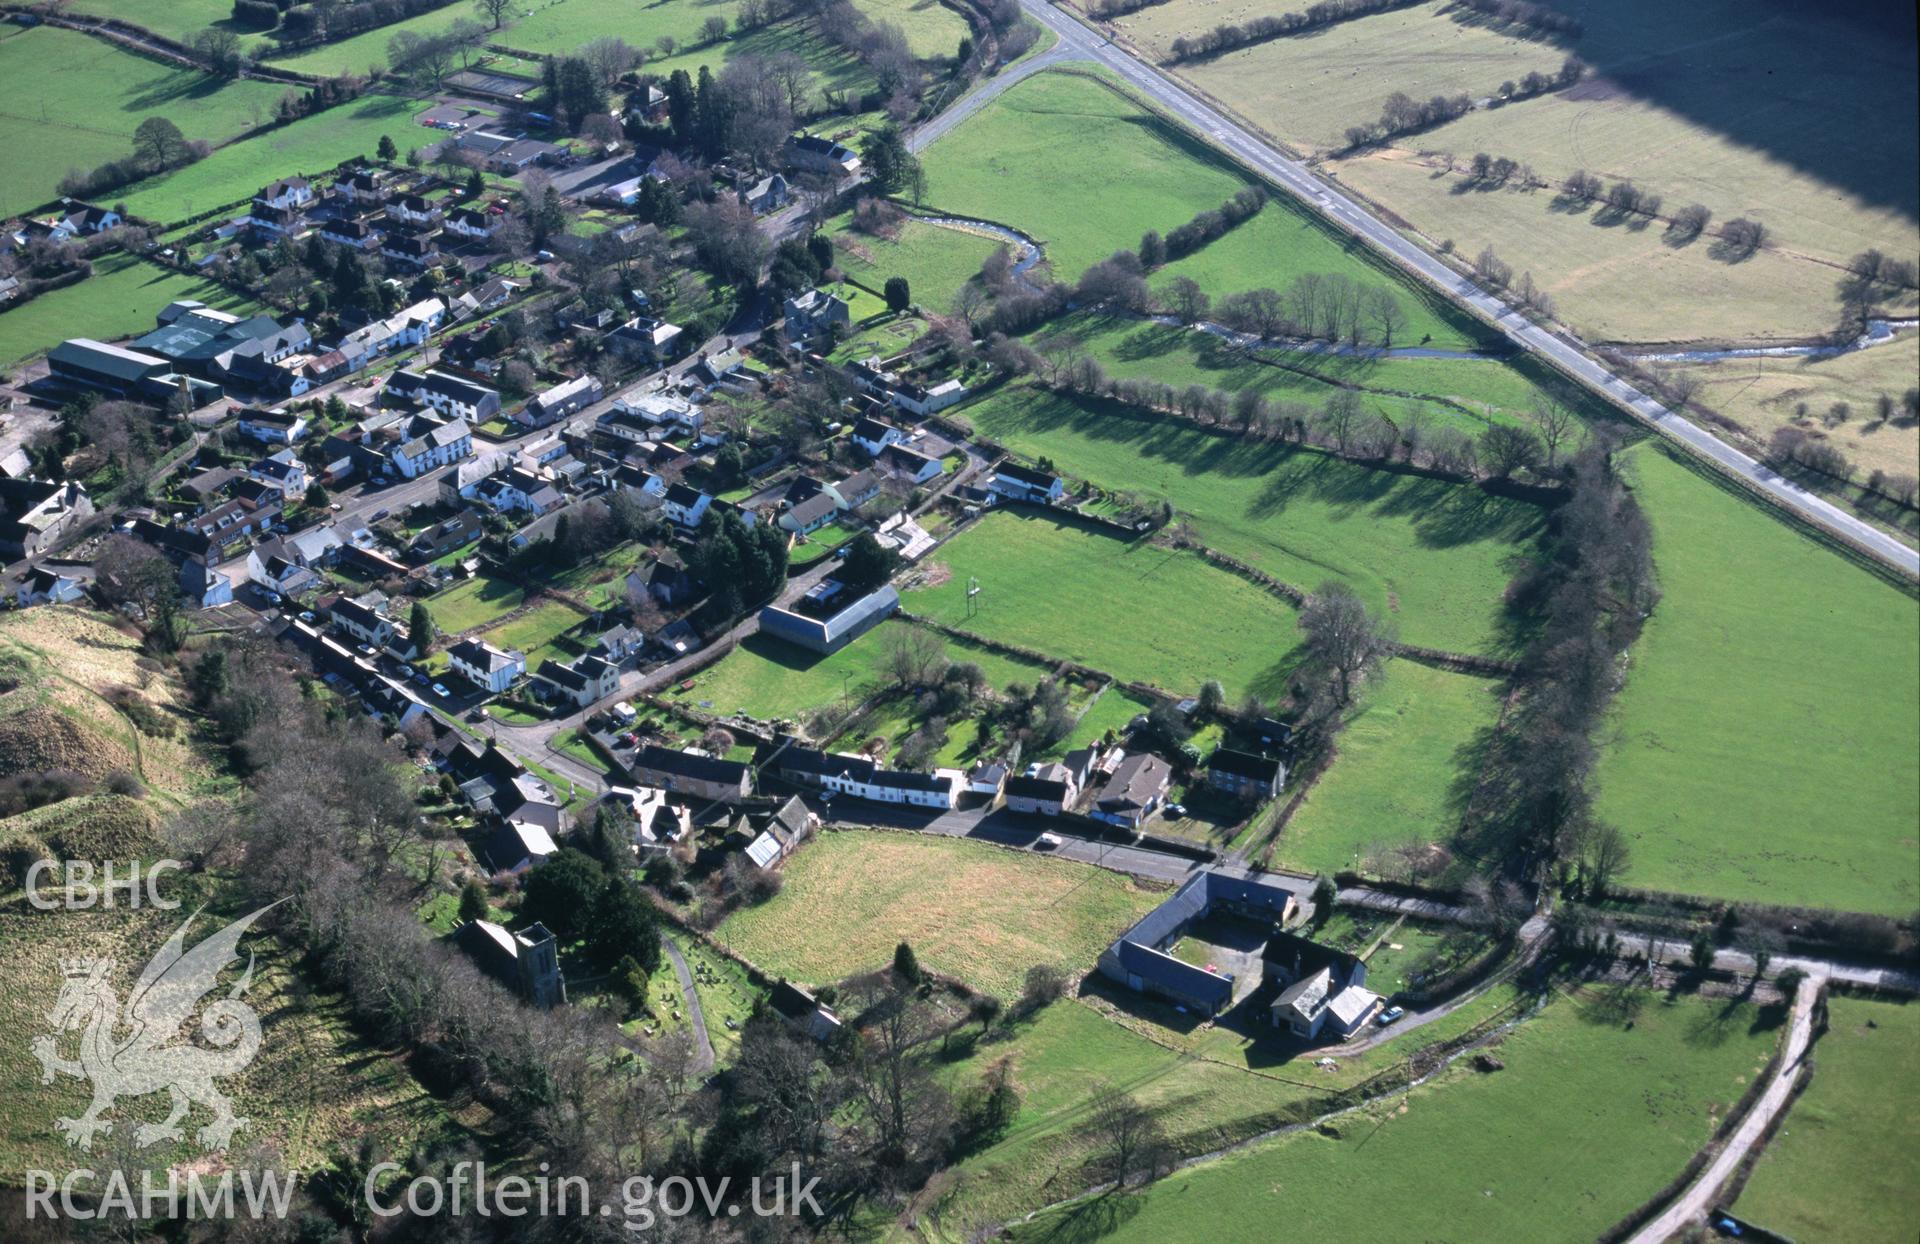 Slide of RCAHMW colour oblique aerial photograph of New Radnor Town, taken by T.G. Driver, 16/2/2001.